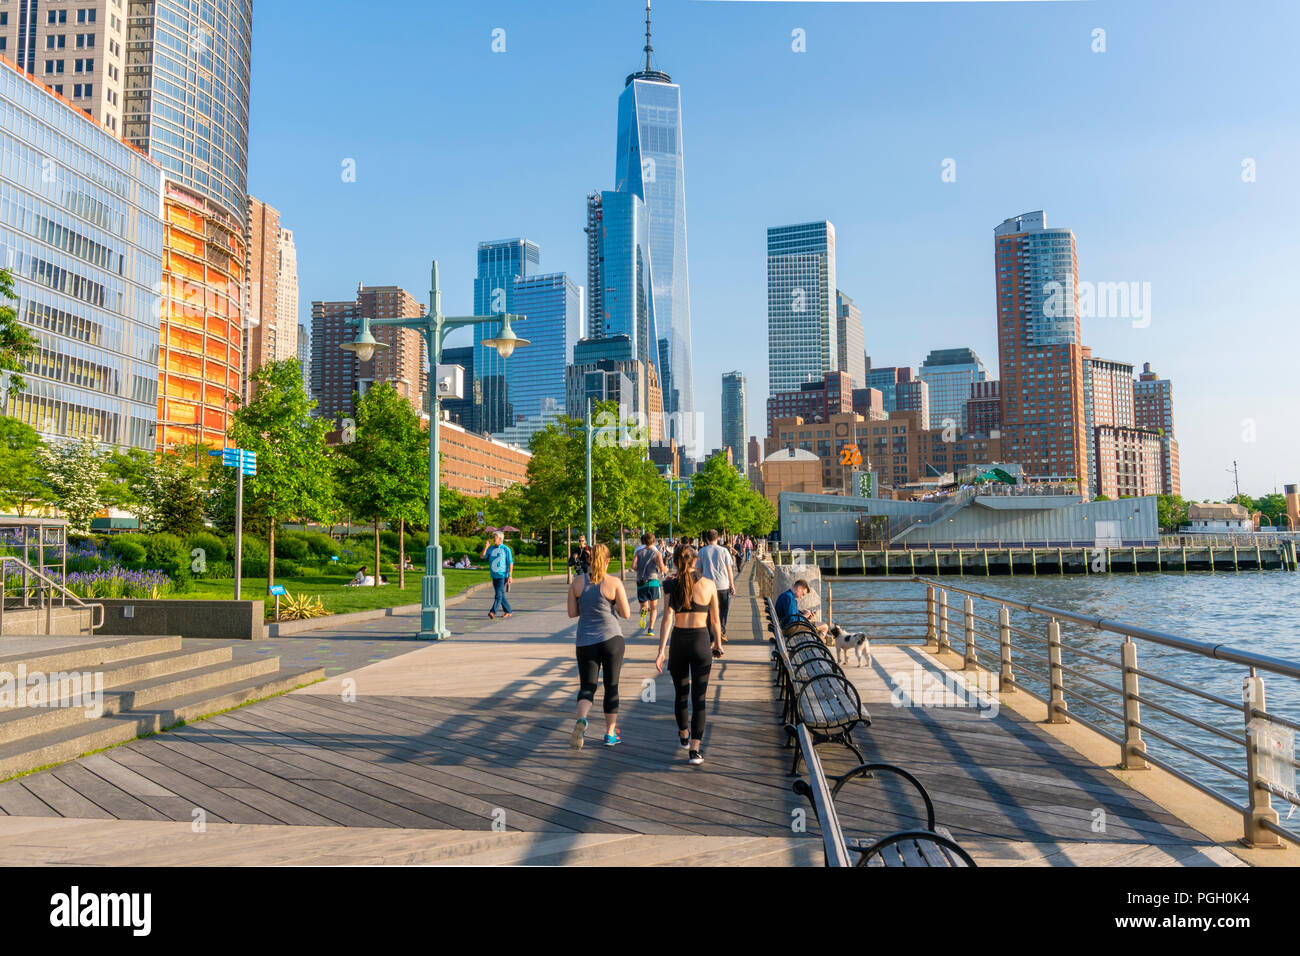 People walking and jogging along the promenade in New York City Stock Photo